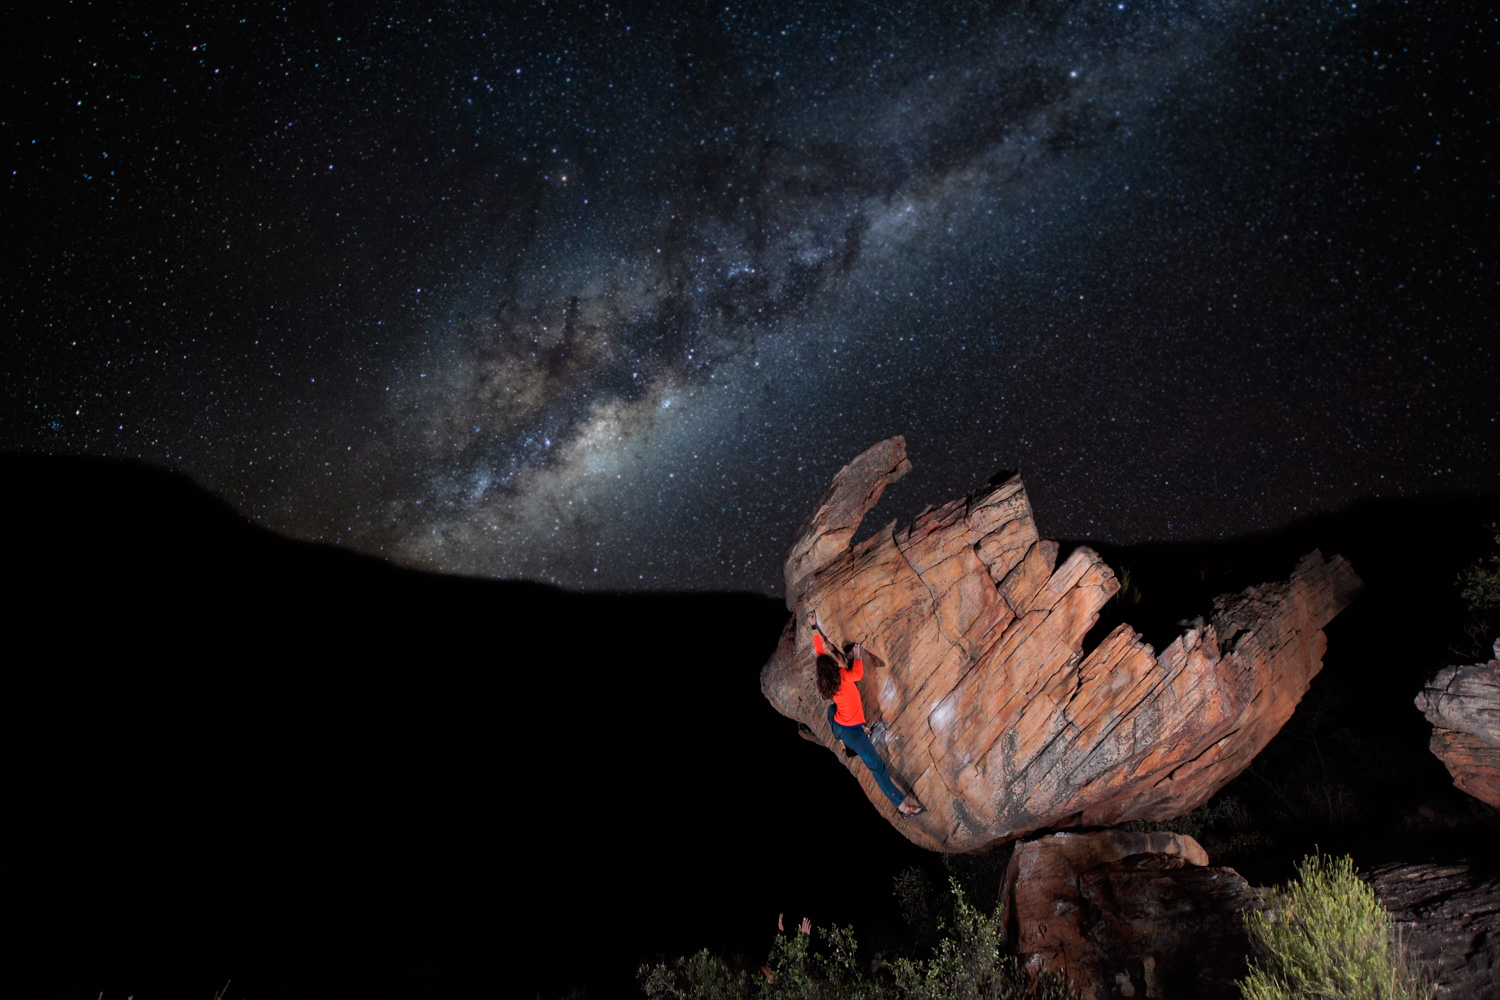 climber in front of the milky way in the night sky